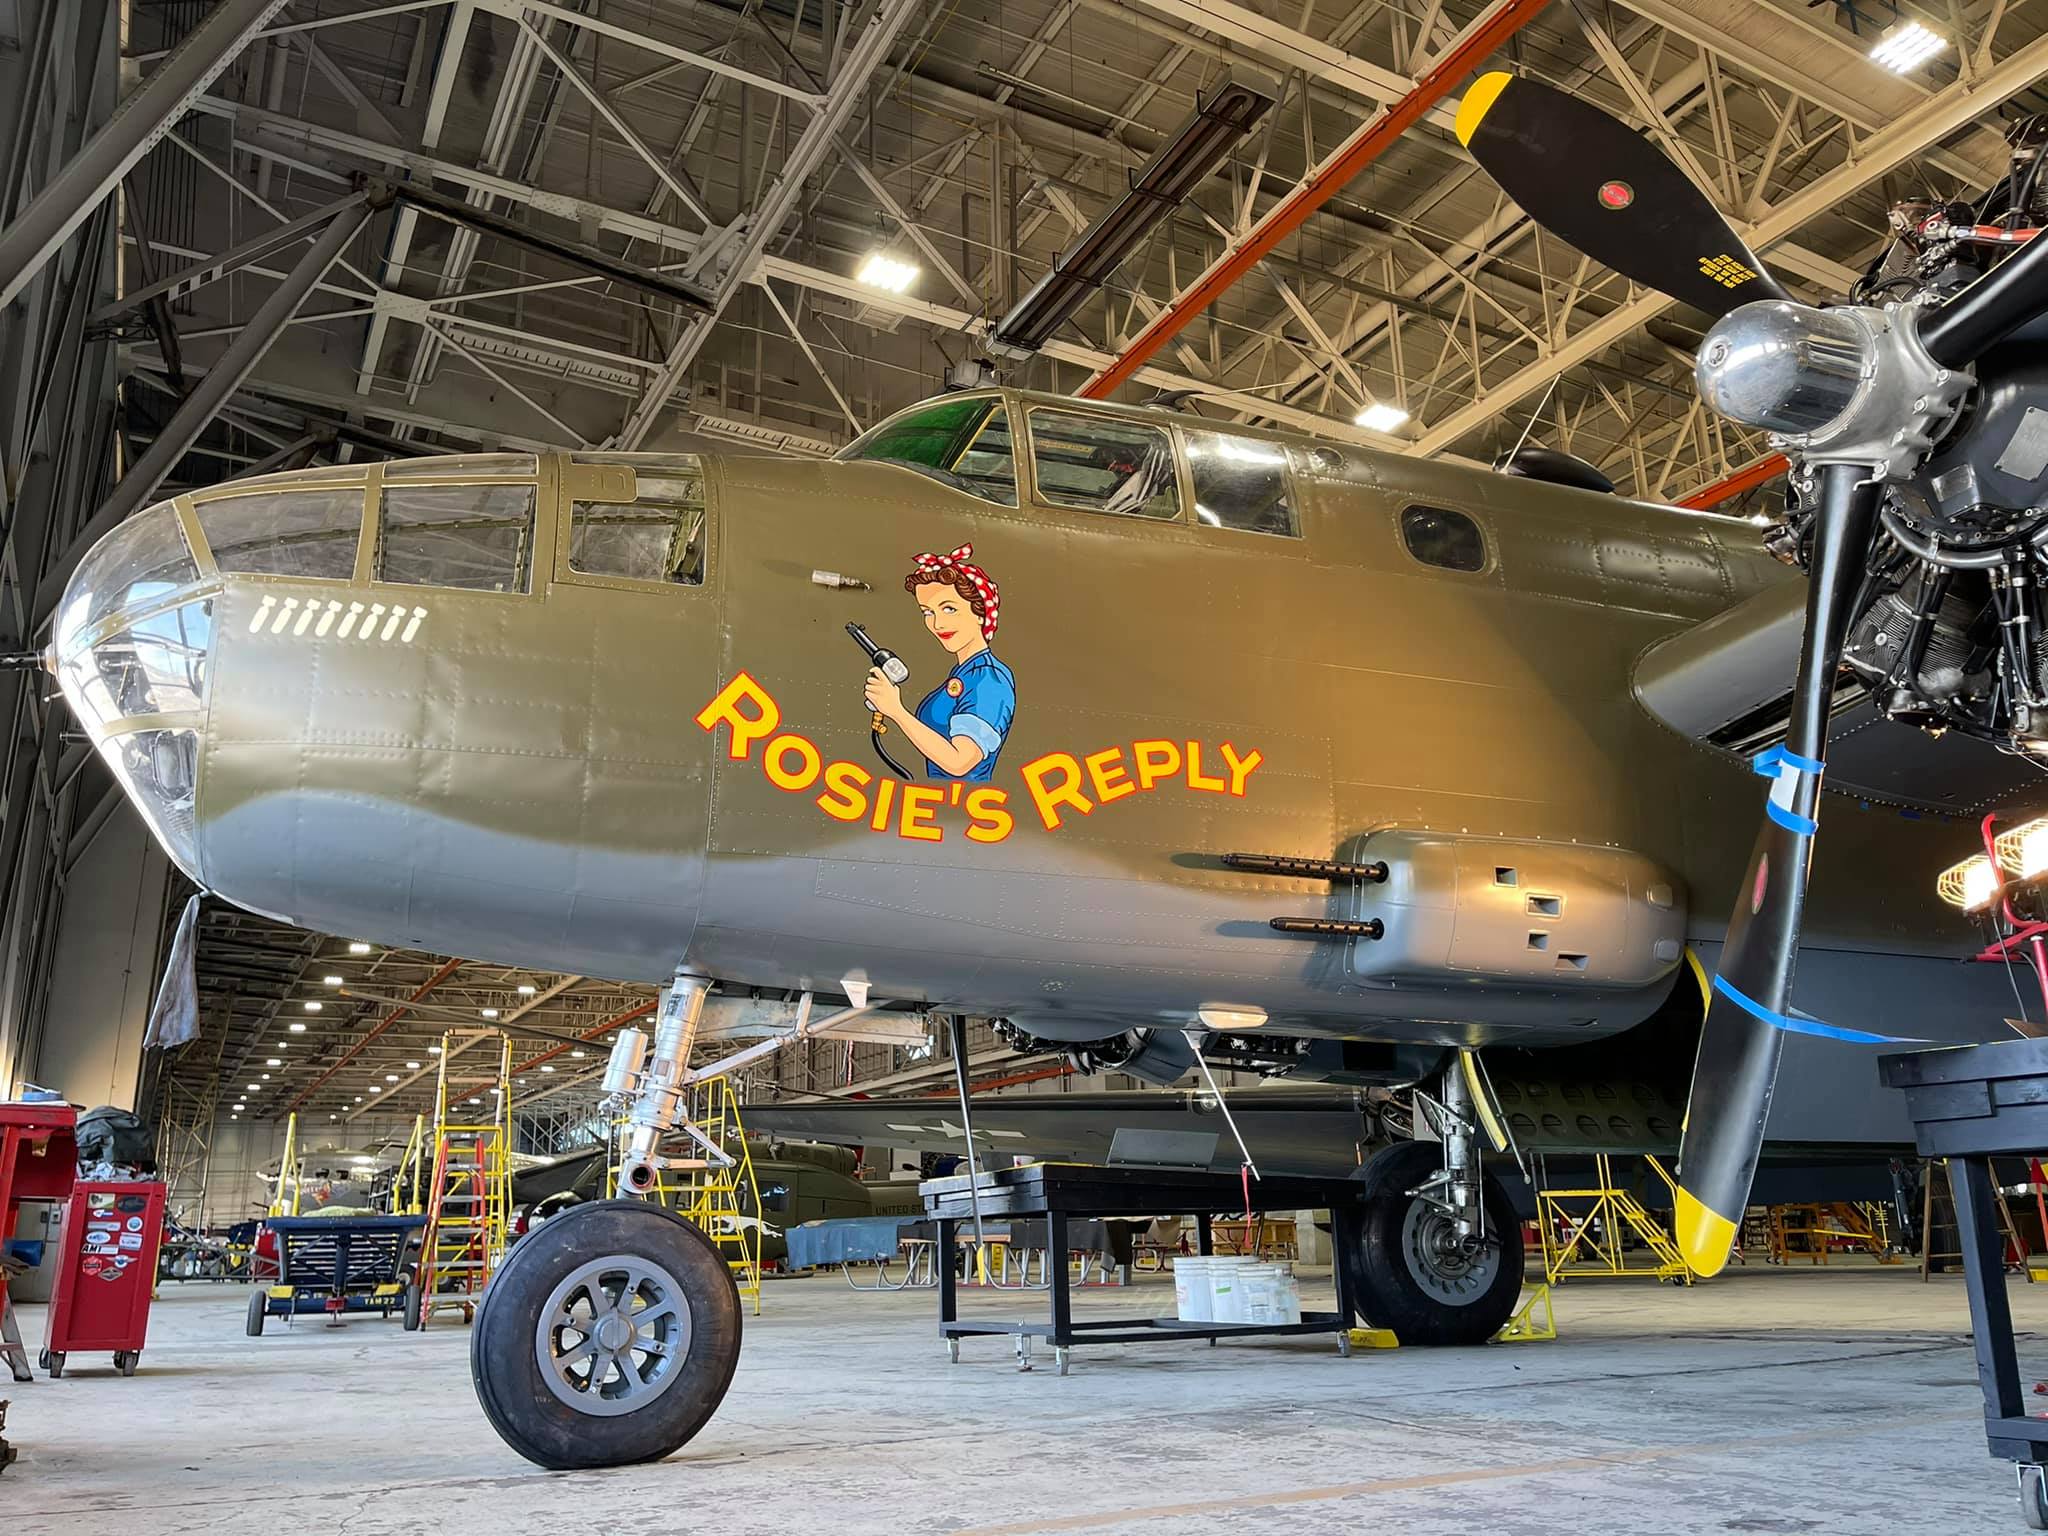 Yankee Air Museum's B-25 Becomes 'Rosie's Reply